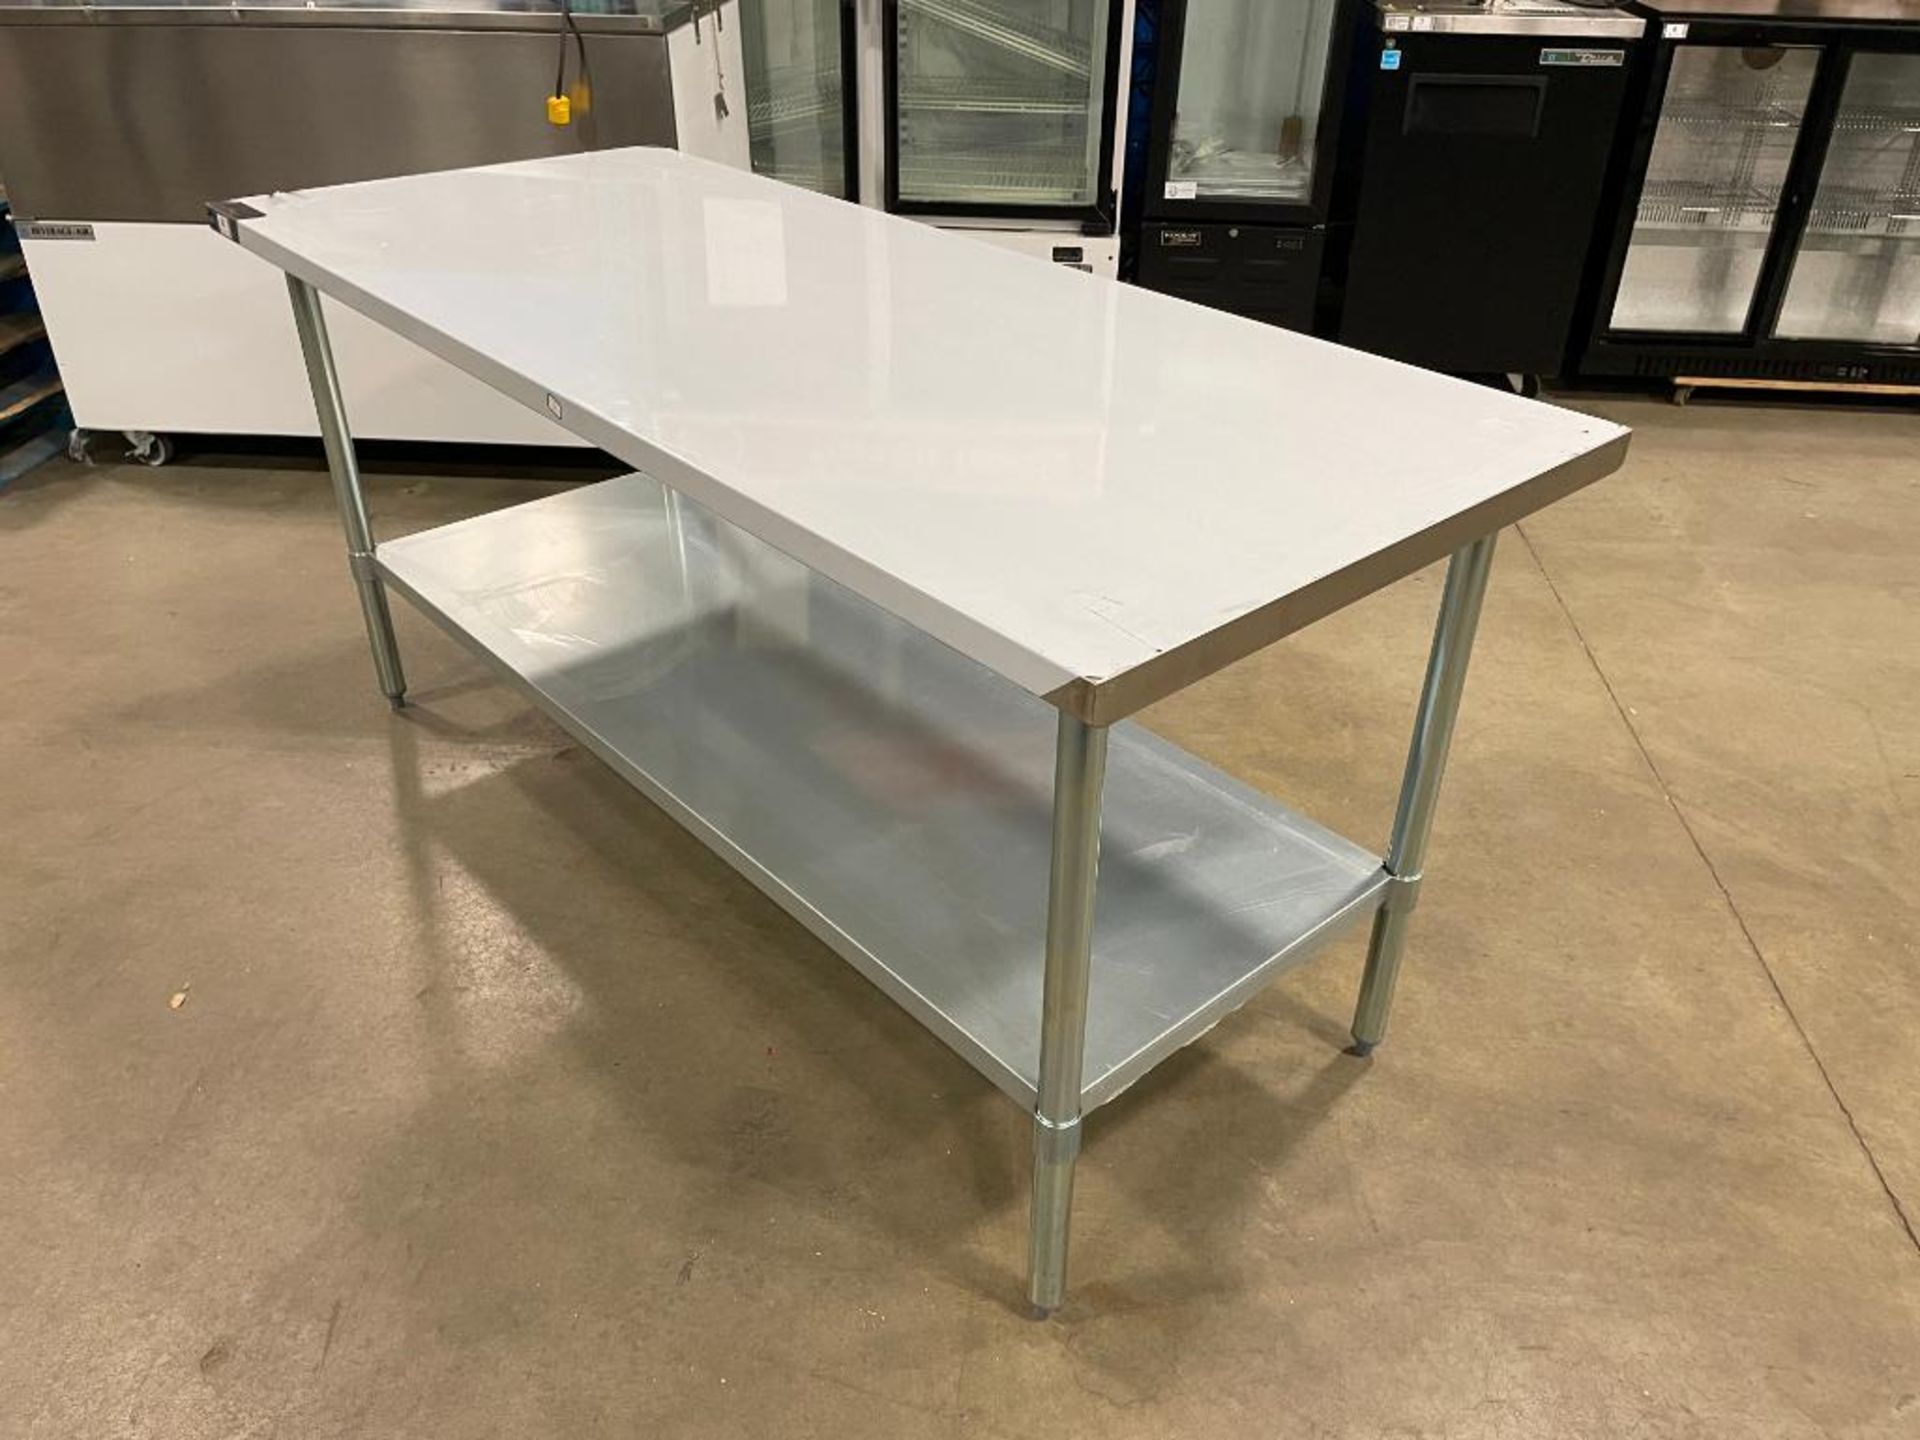 NEW 30" X 72" STAINLESS STEEL WORK TABLE WITH UNDERSHELF - Image 6 of 10